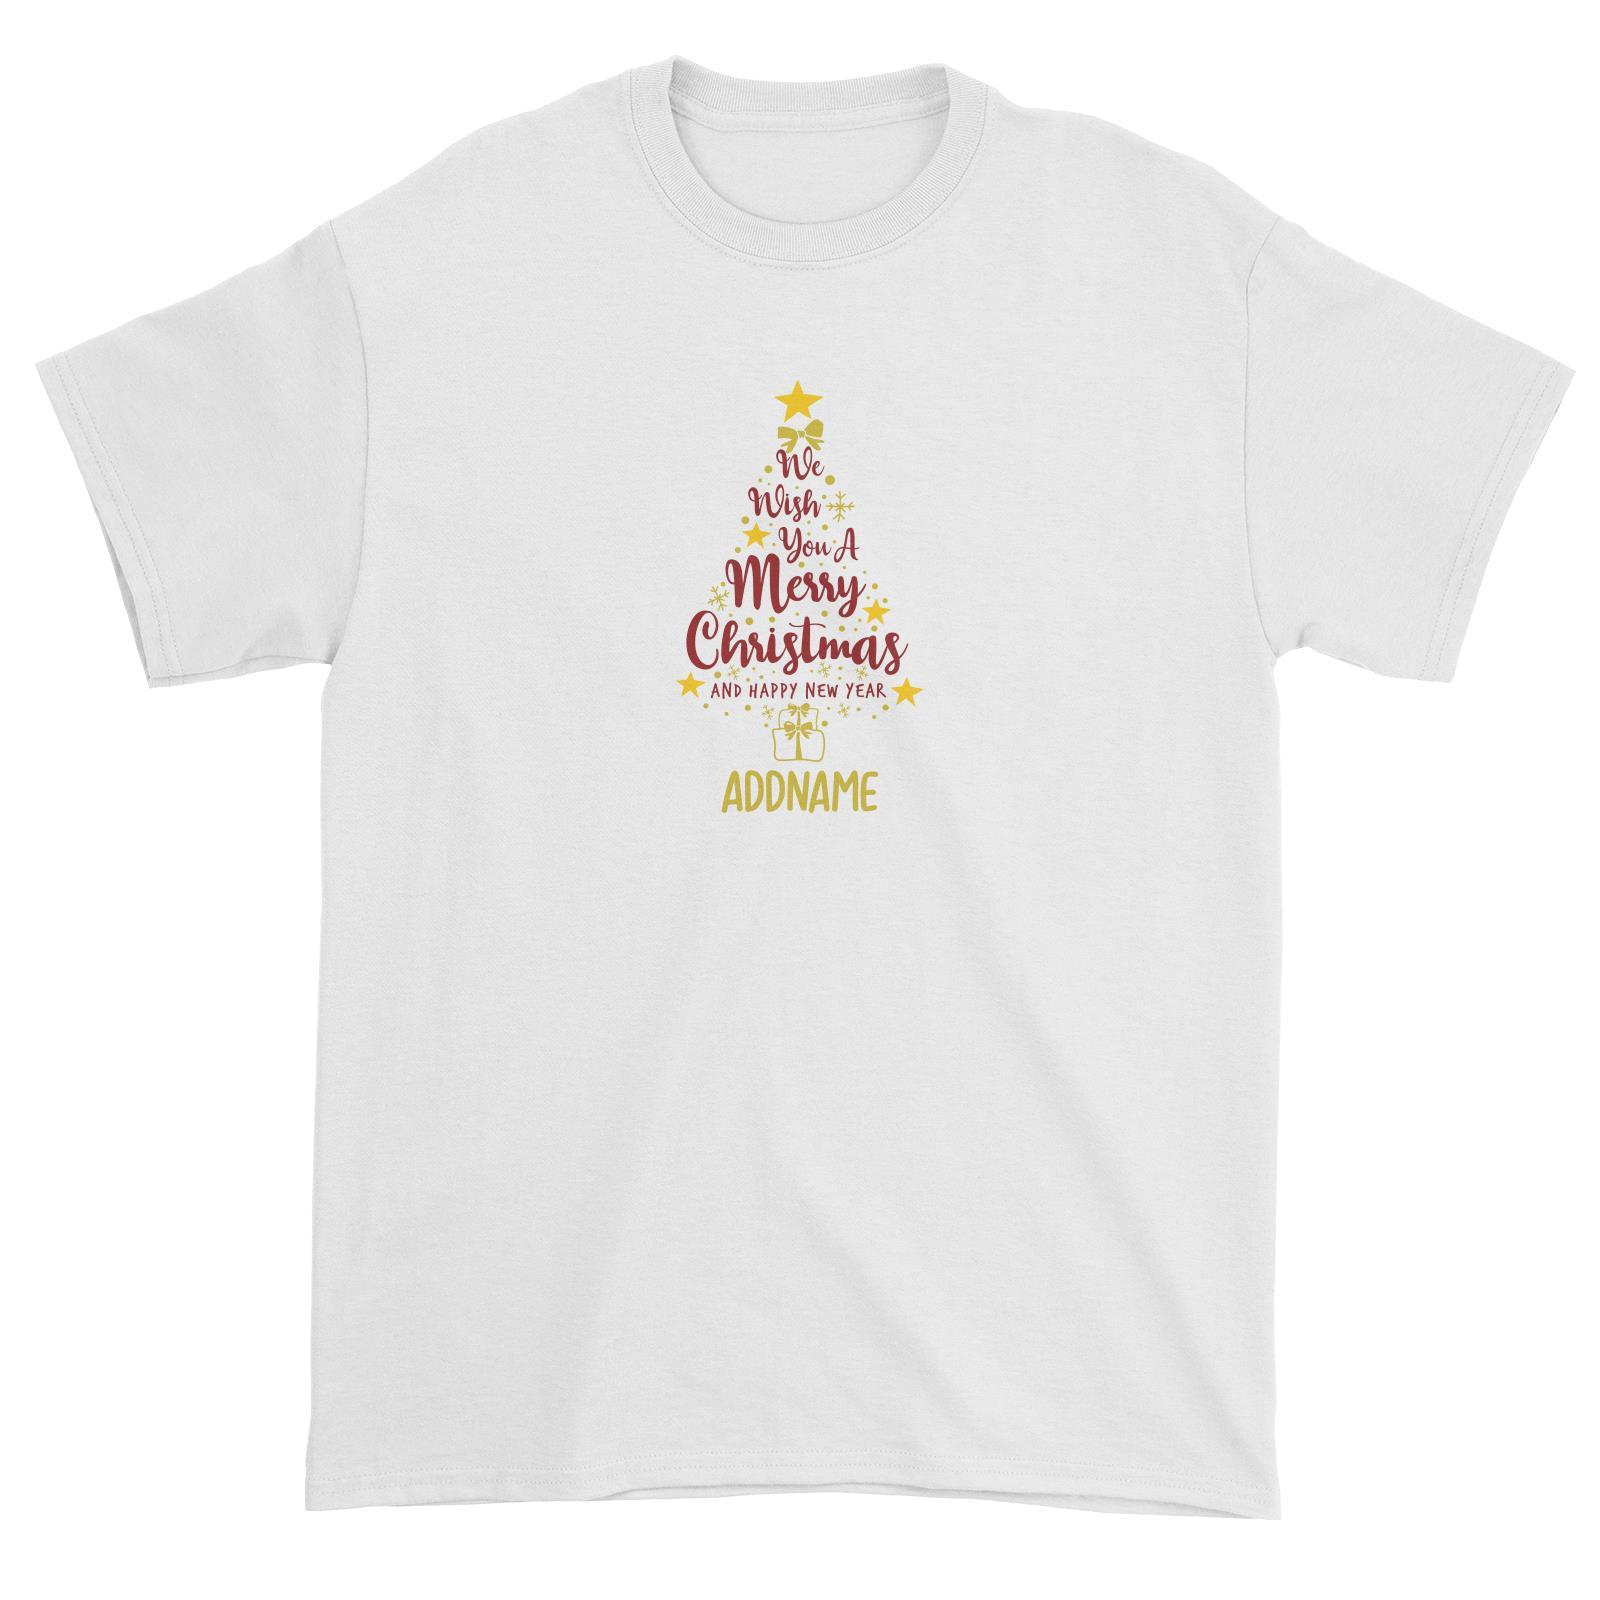 Xmas We Wish You A Merry Christmas and A Happy New Year Unisex T-Shirt